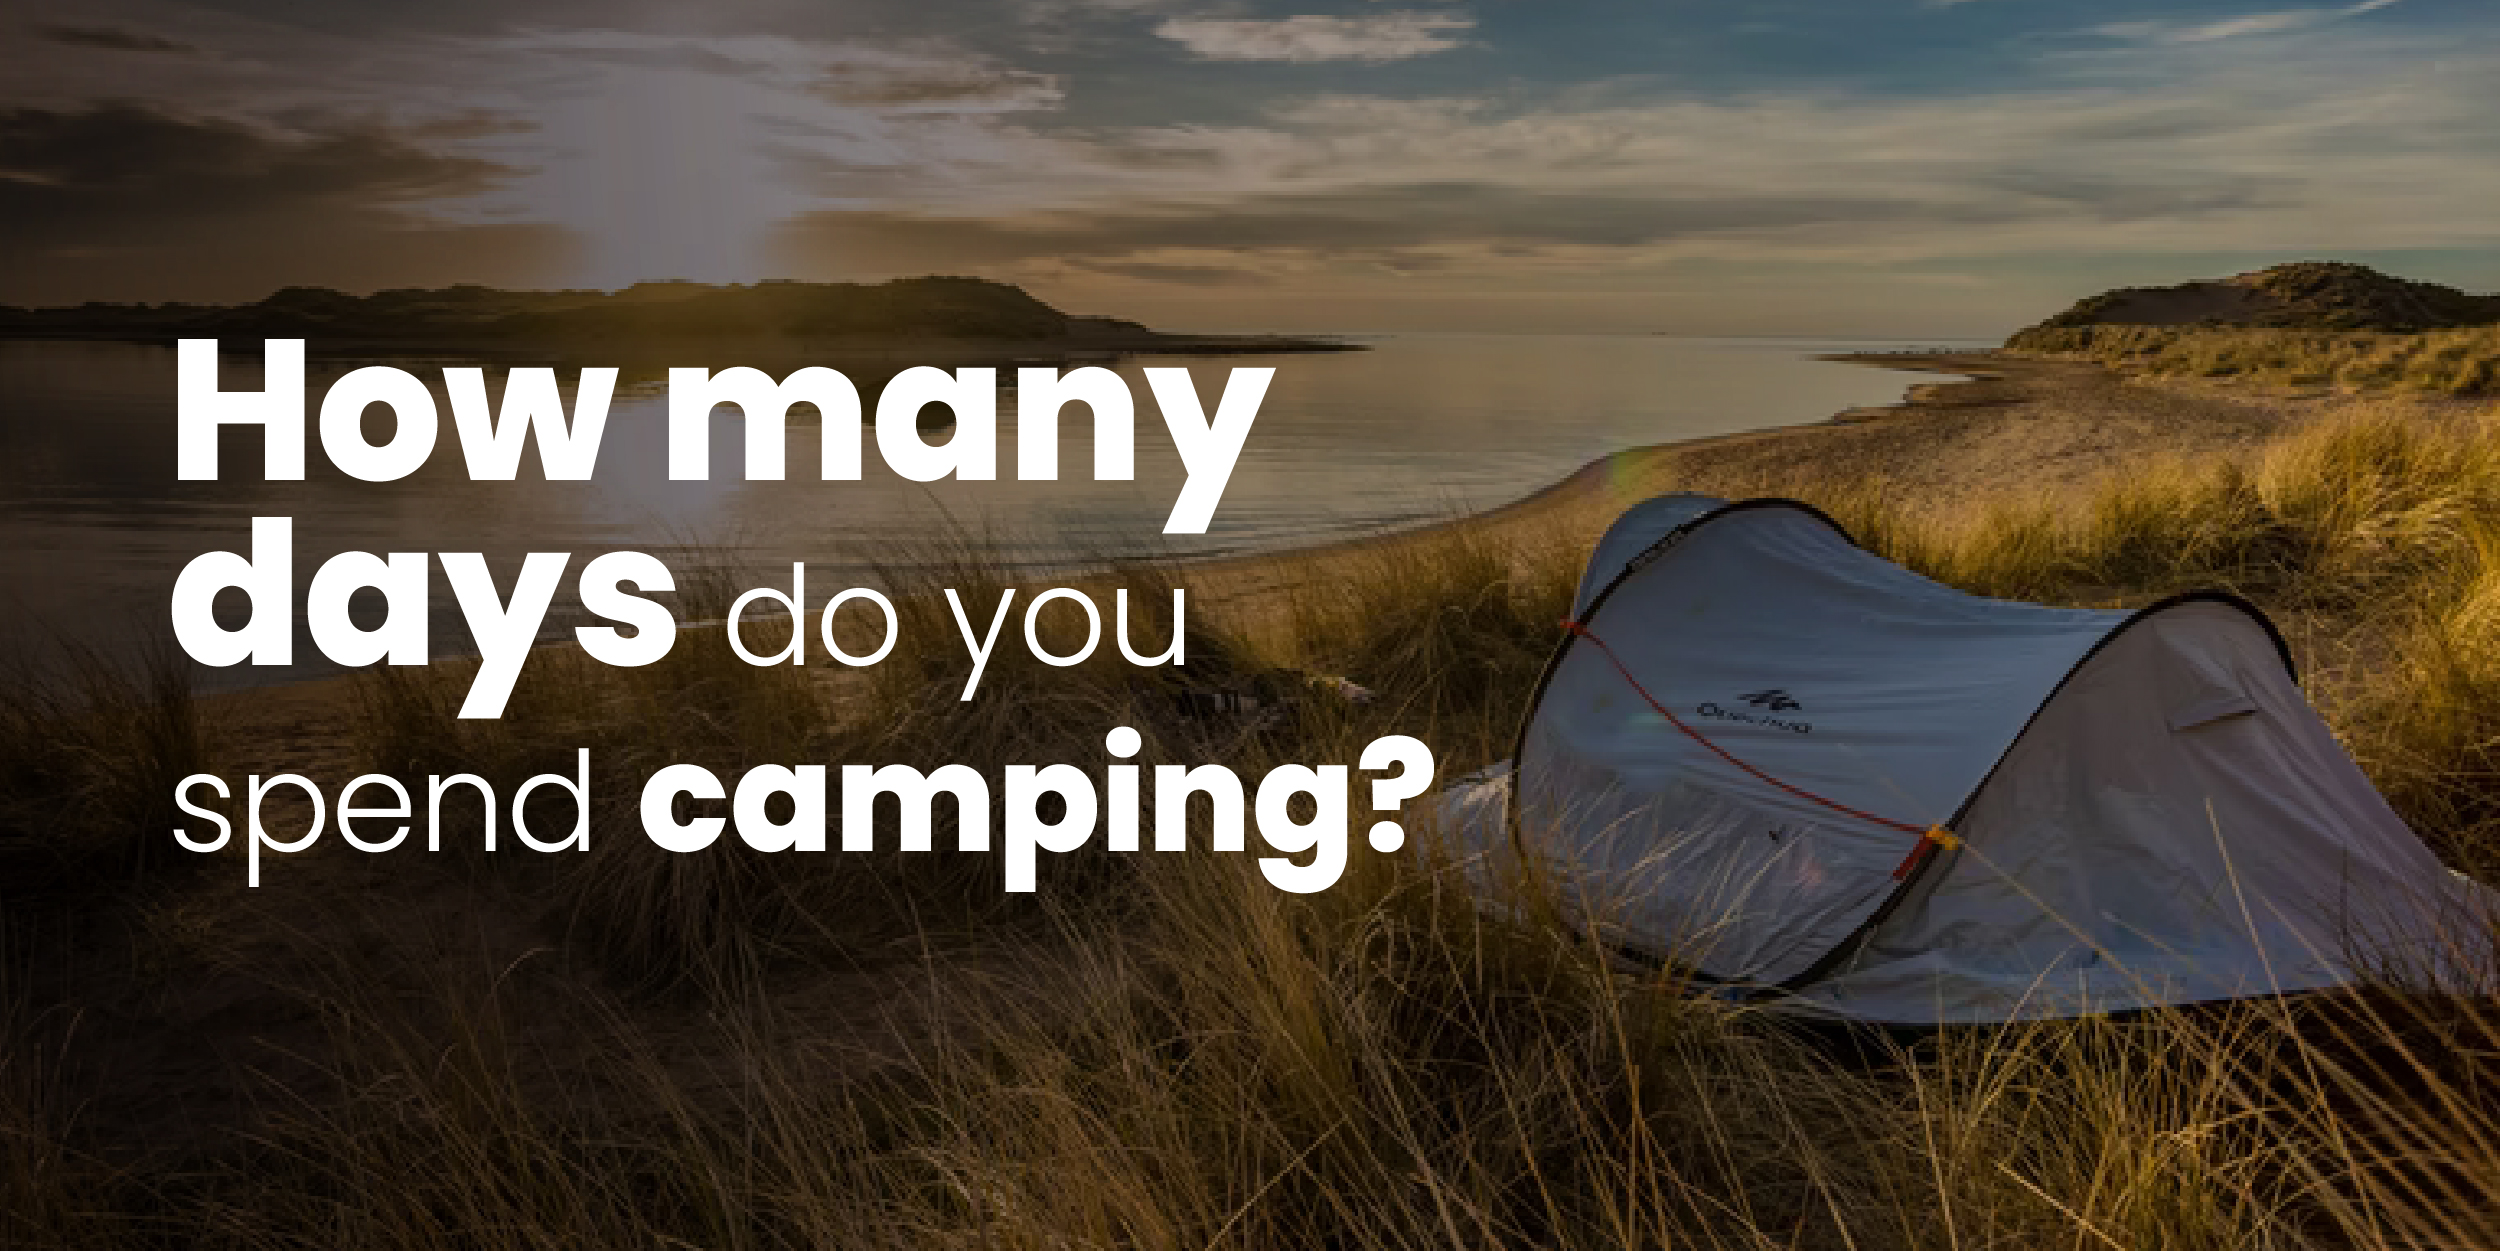 How many days do you spend camping